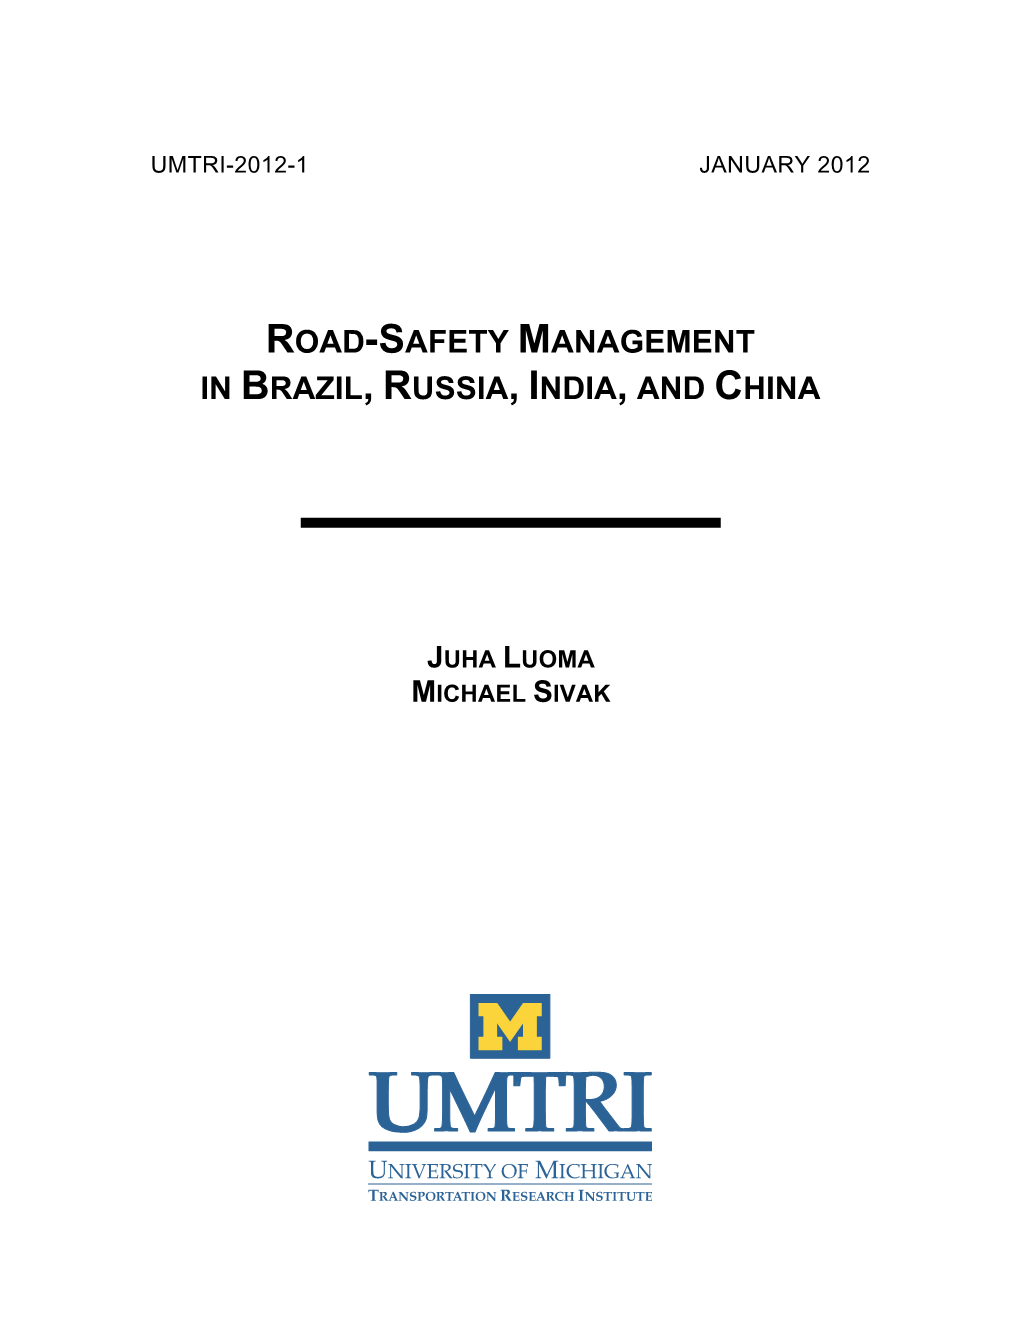 Road-Safety Management in Brazil, Russia, India, and China